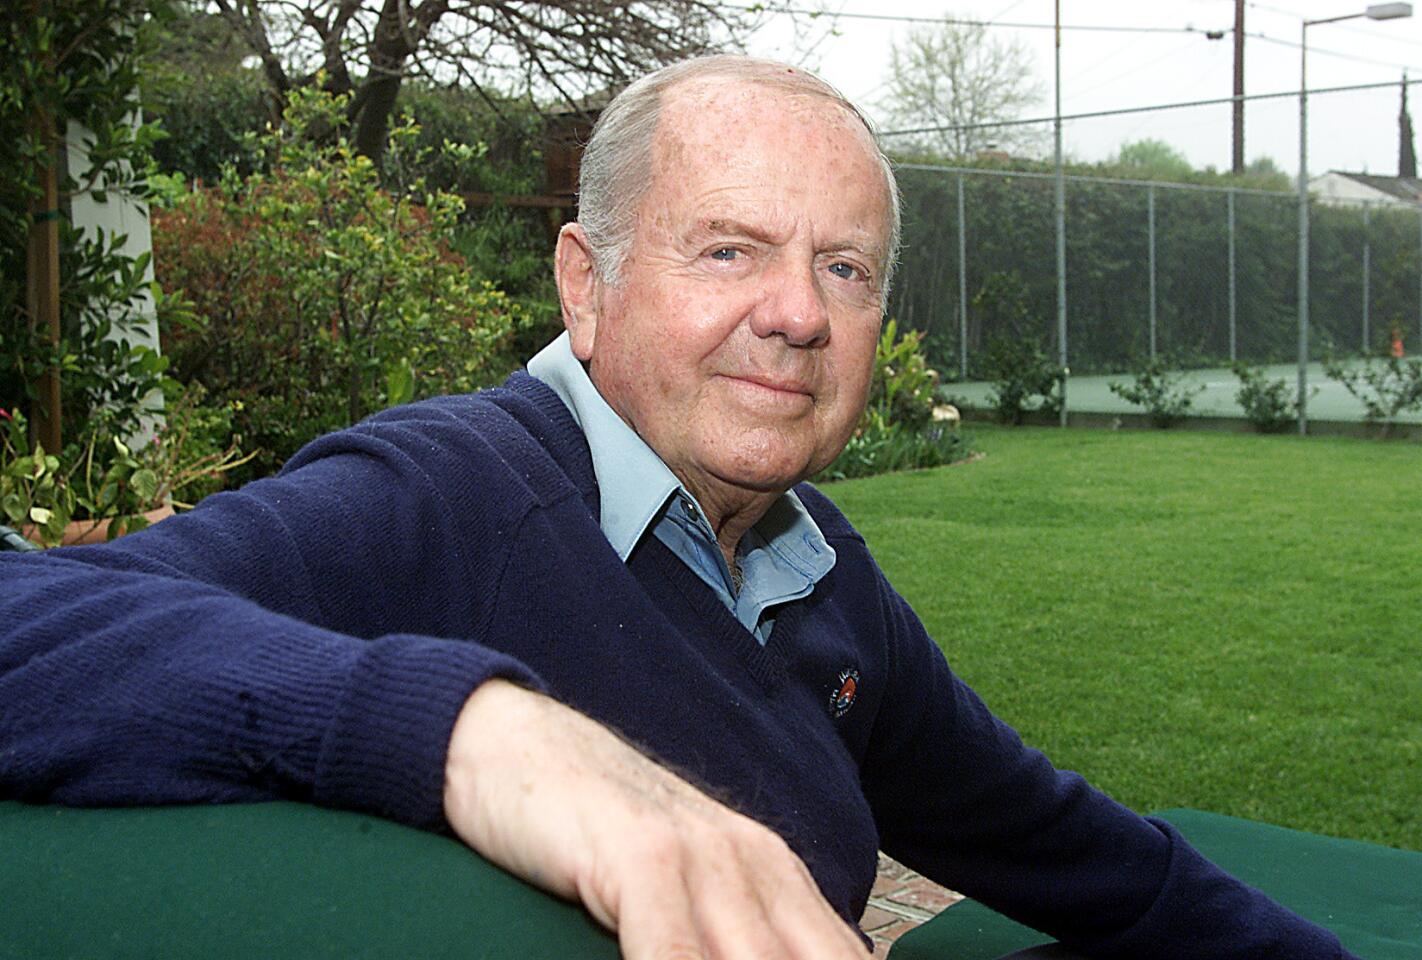 Dick Van Patten, a stage and screen actor most famous for starring as loving father Tom Bradford on the television series “Eight is Enough,” has died, the Associated Press confirmed. He was 86.